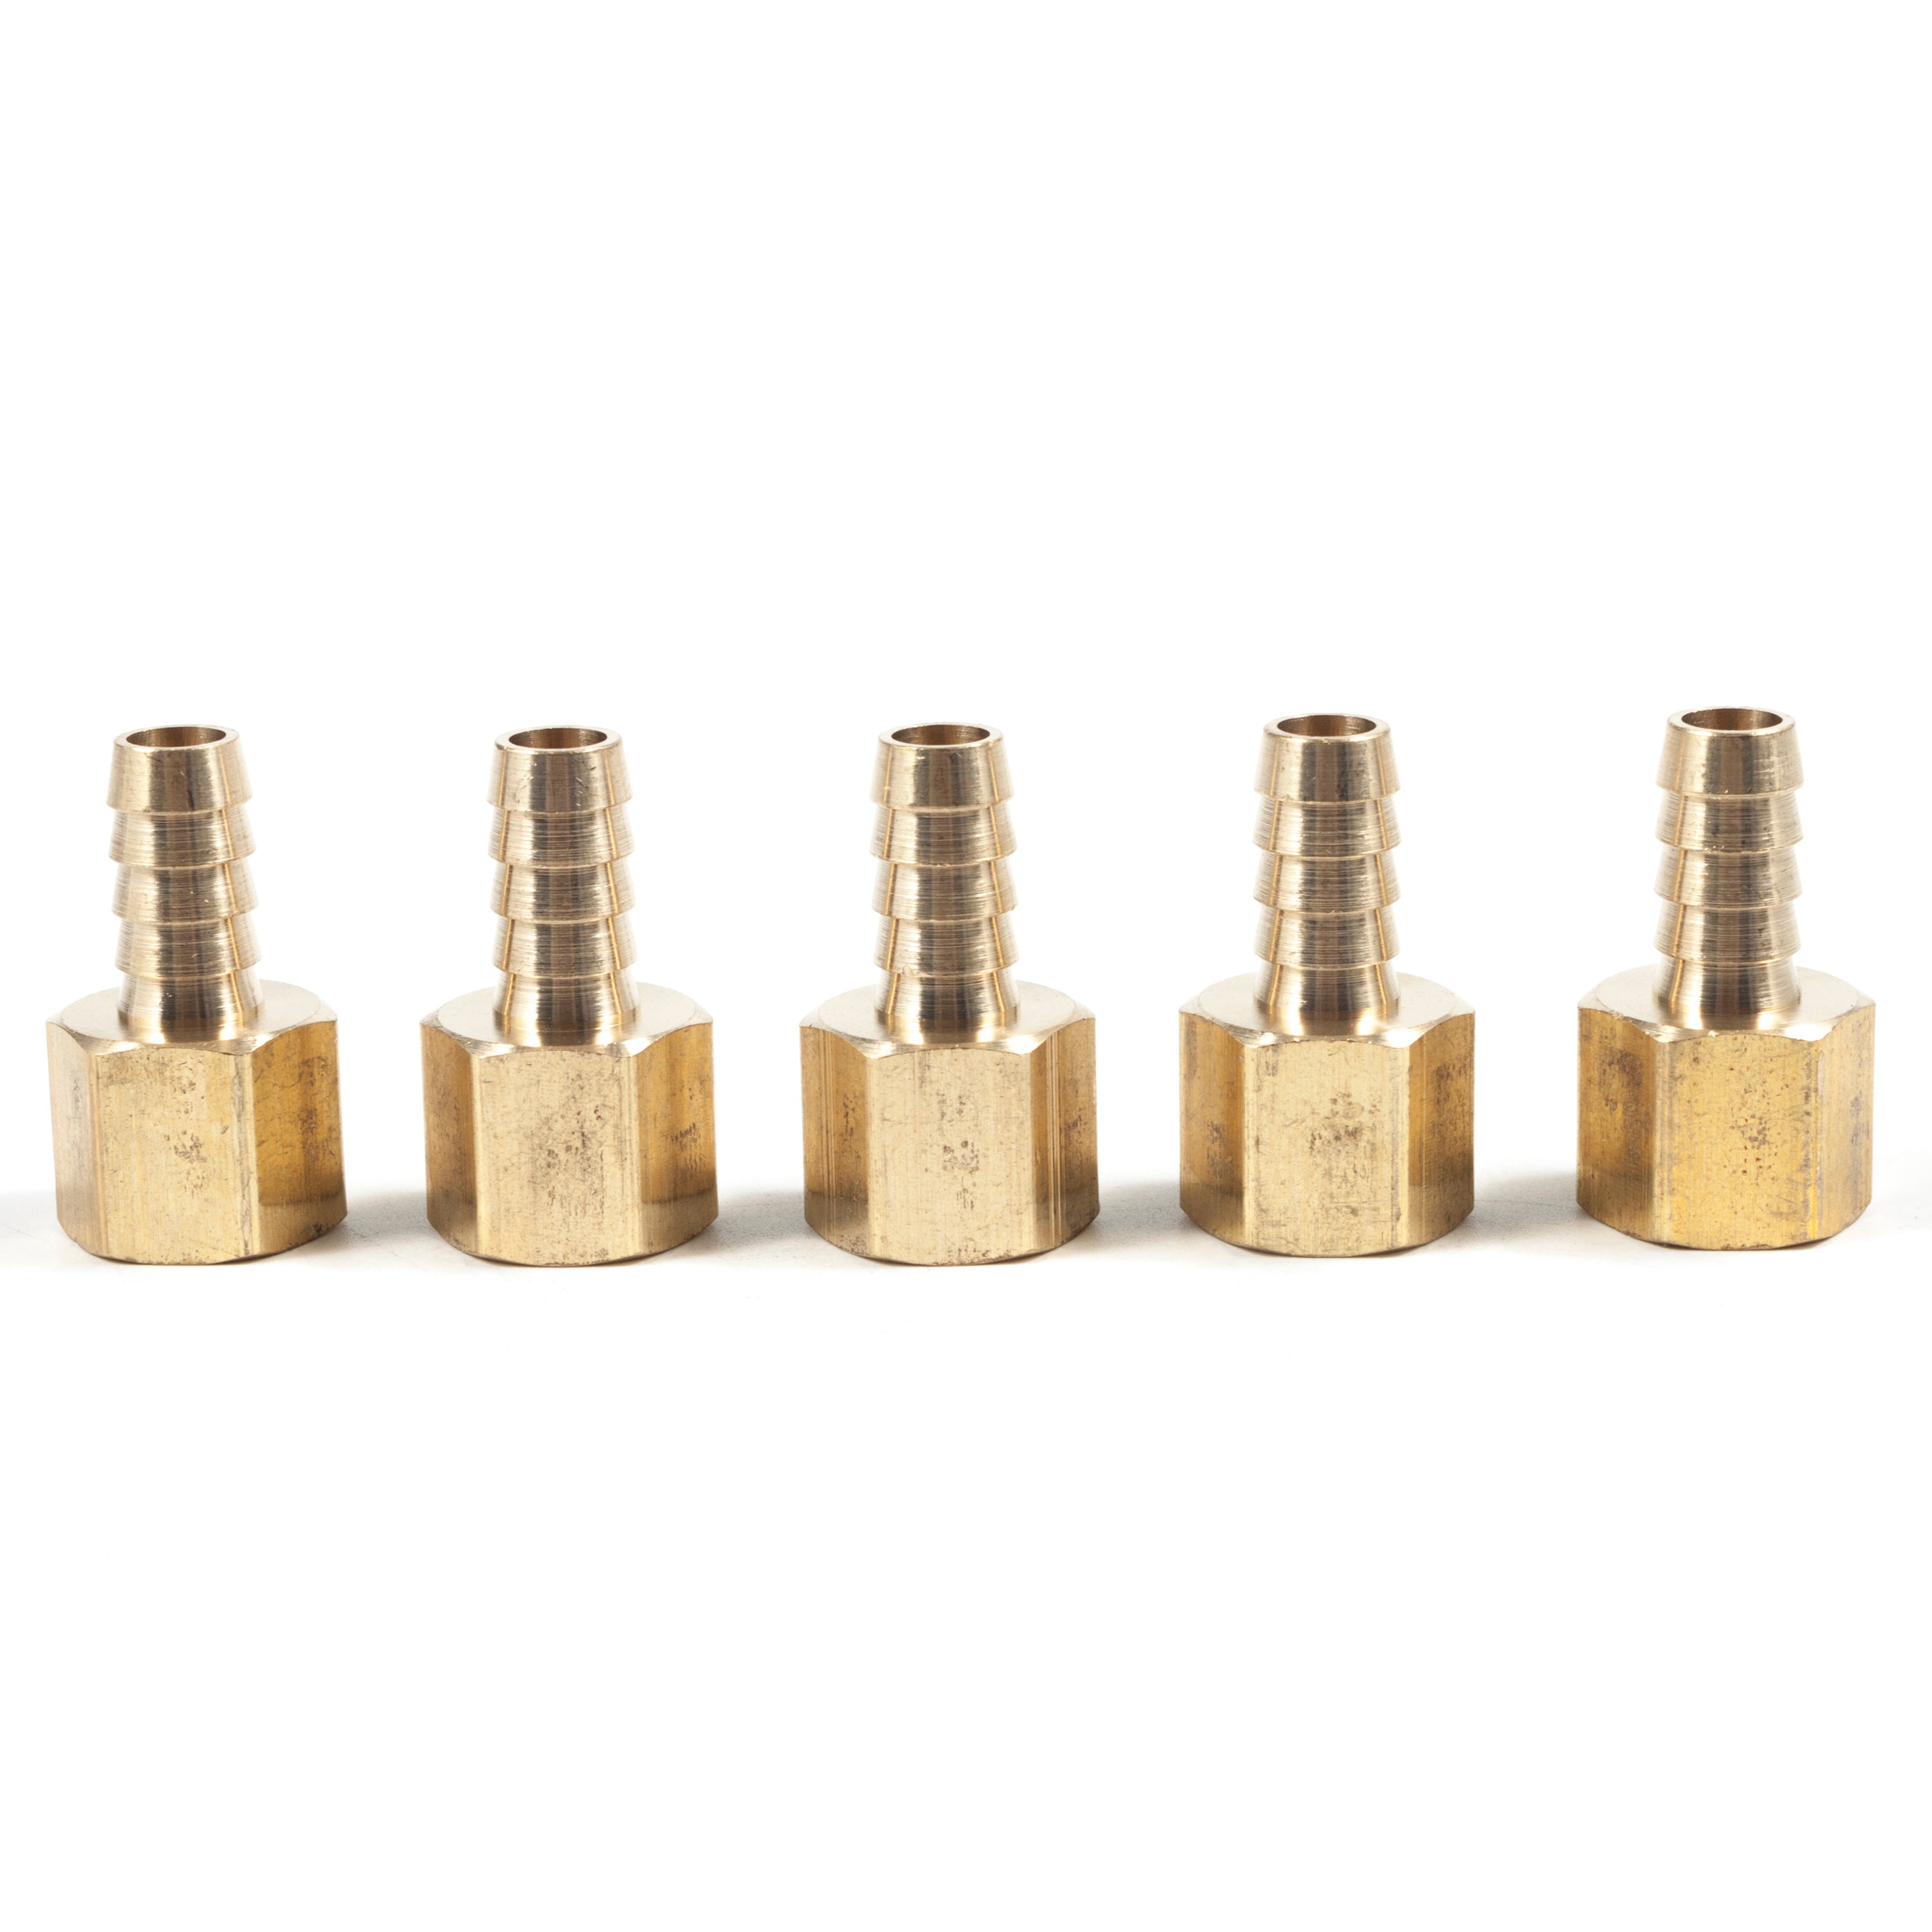 LTWFITTING Brass Fitting Coupler 3/8-Inch Hose Barb x 3/8-Inch Female NPT Fuel Water Boat(Pack of 5)